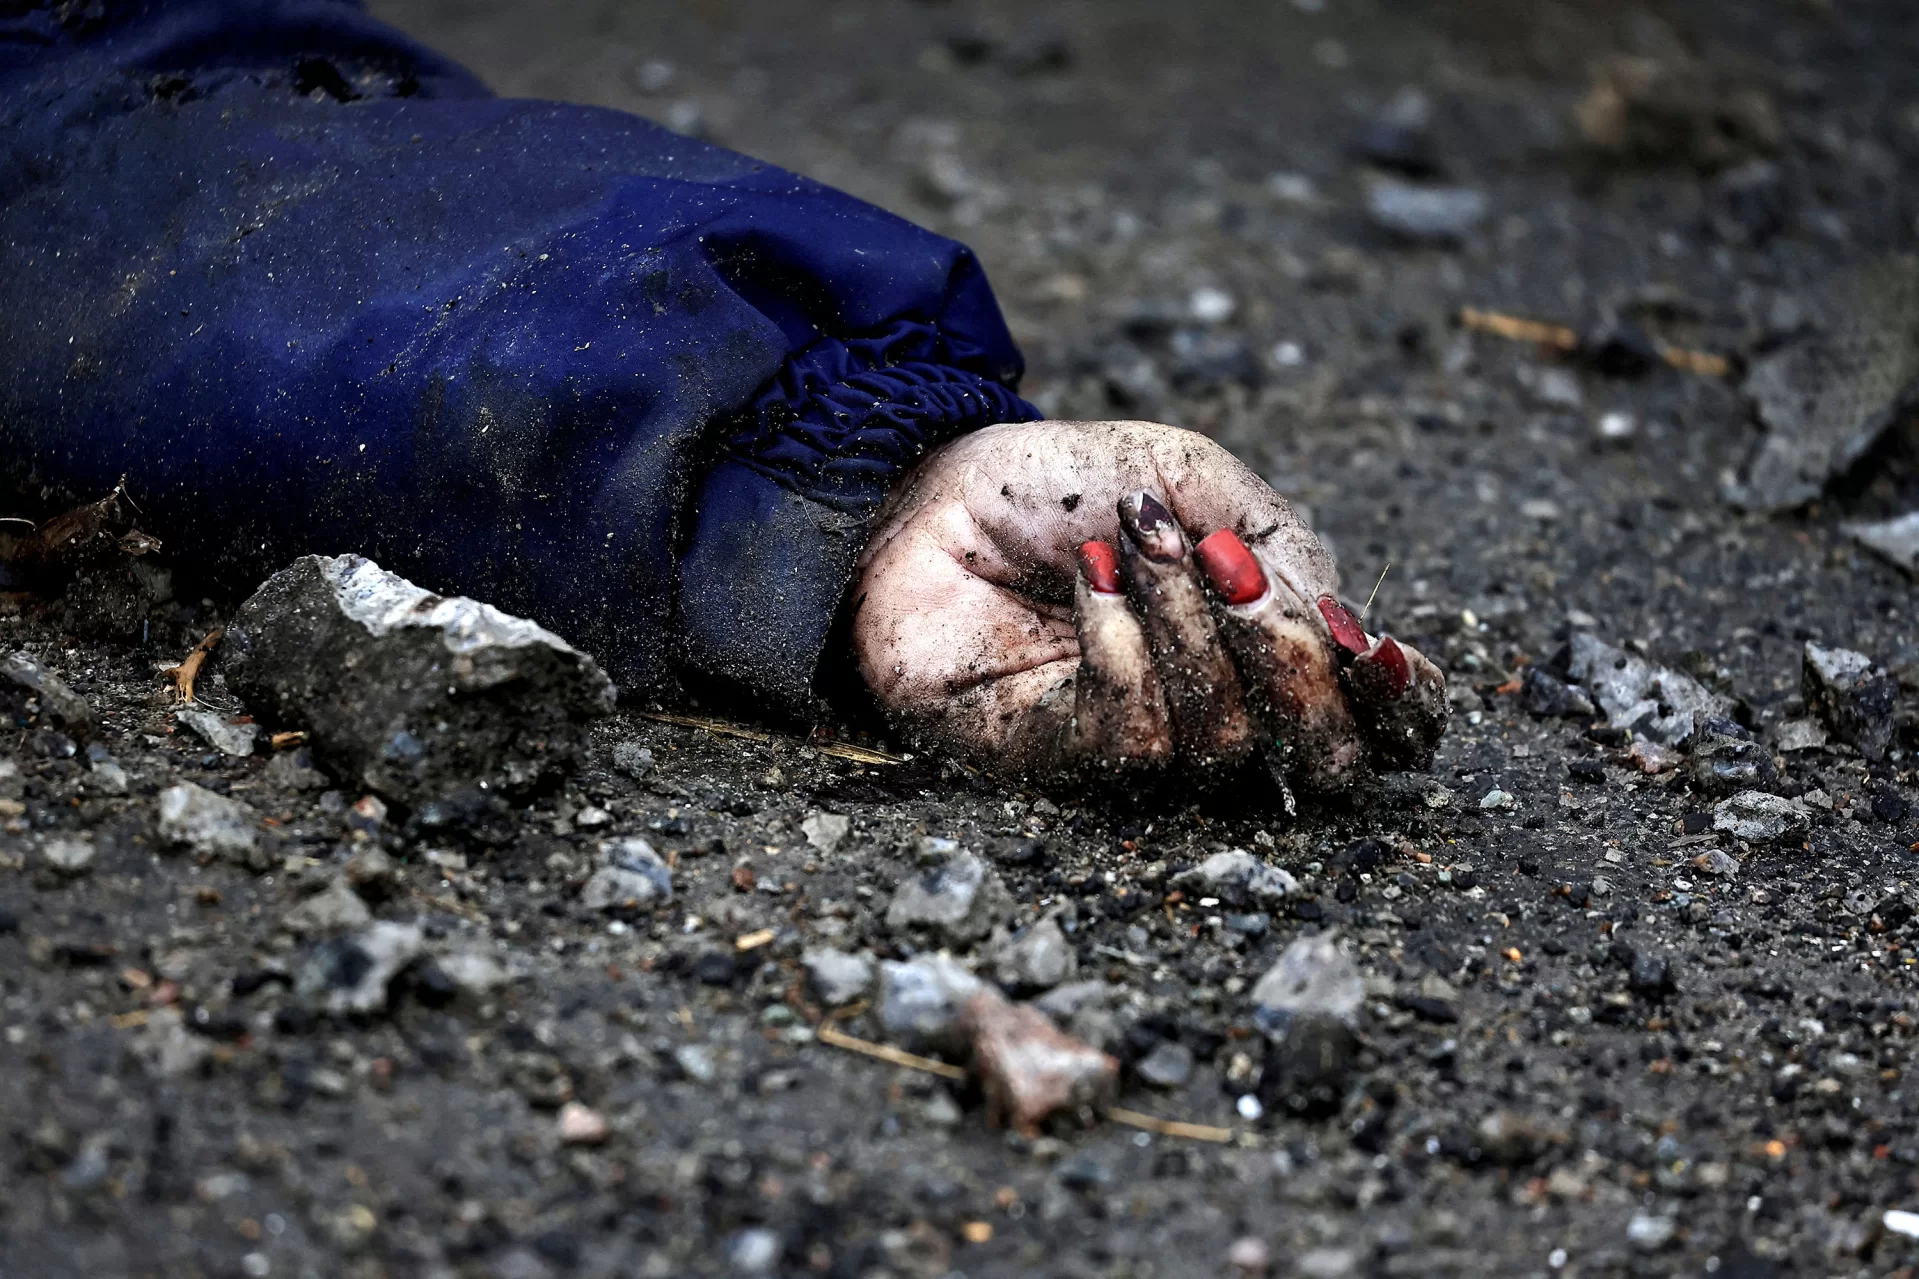 FILE PHOTO: SENSITIVE MATERIAL. THIS IMAGE MAY OFFEND OR DISTURB        The hand of Iryna Filkina, a woman who according to residents was killed by Russian army soldiers, is pictured as her body lies on the street, amid Russia's invasion of Ukraine, in Bucha, Kyiv region, Ukraine April 2, 2022.        REUTERS/Zohra Bensemra SEARCH " UKRAINE-CRISIS/ANNIVERSARY-TIMELINE" FOR ALL IMAGES/File Photo